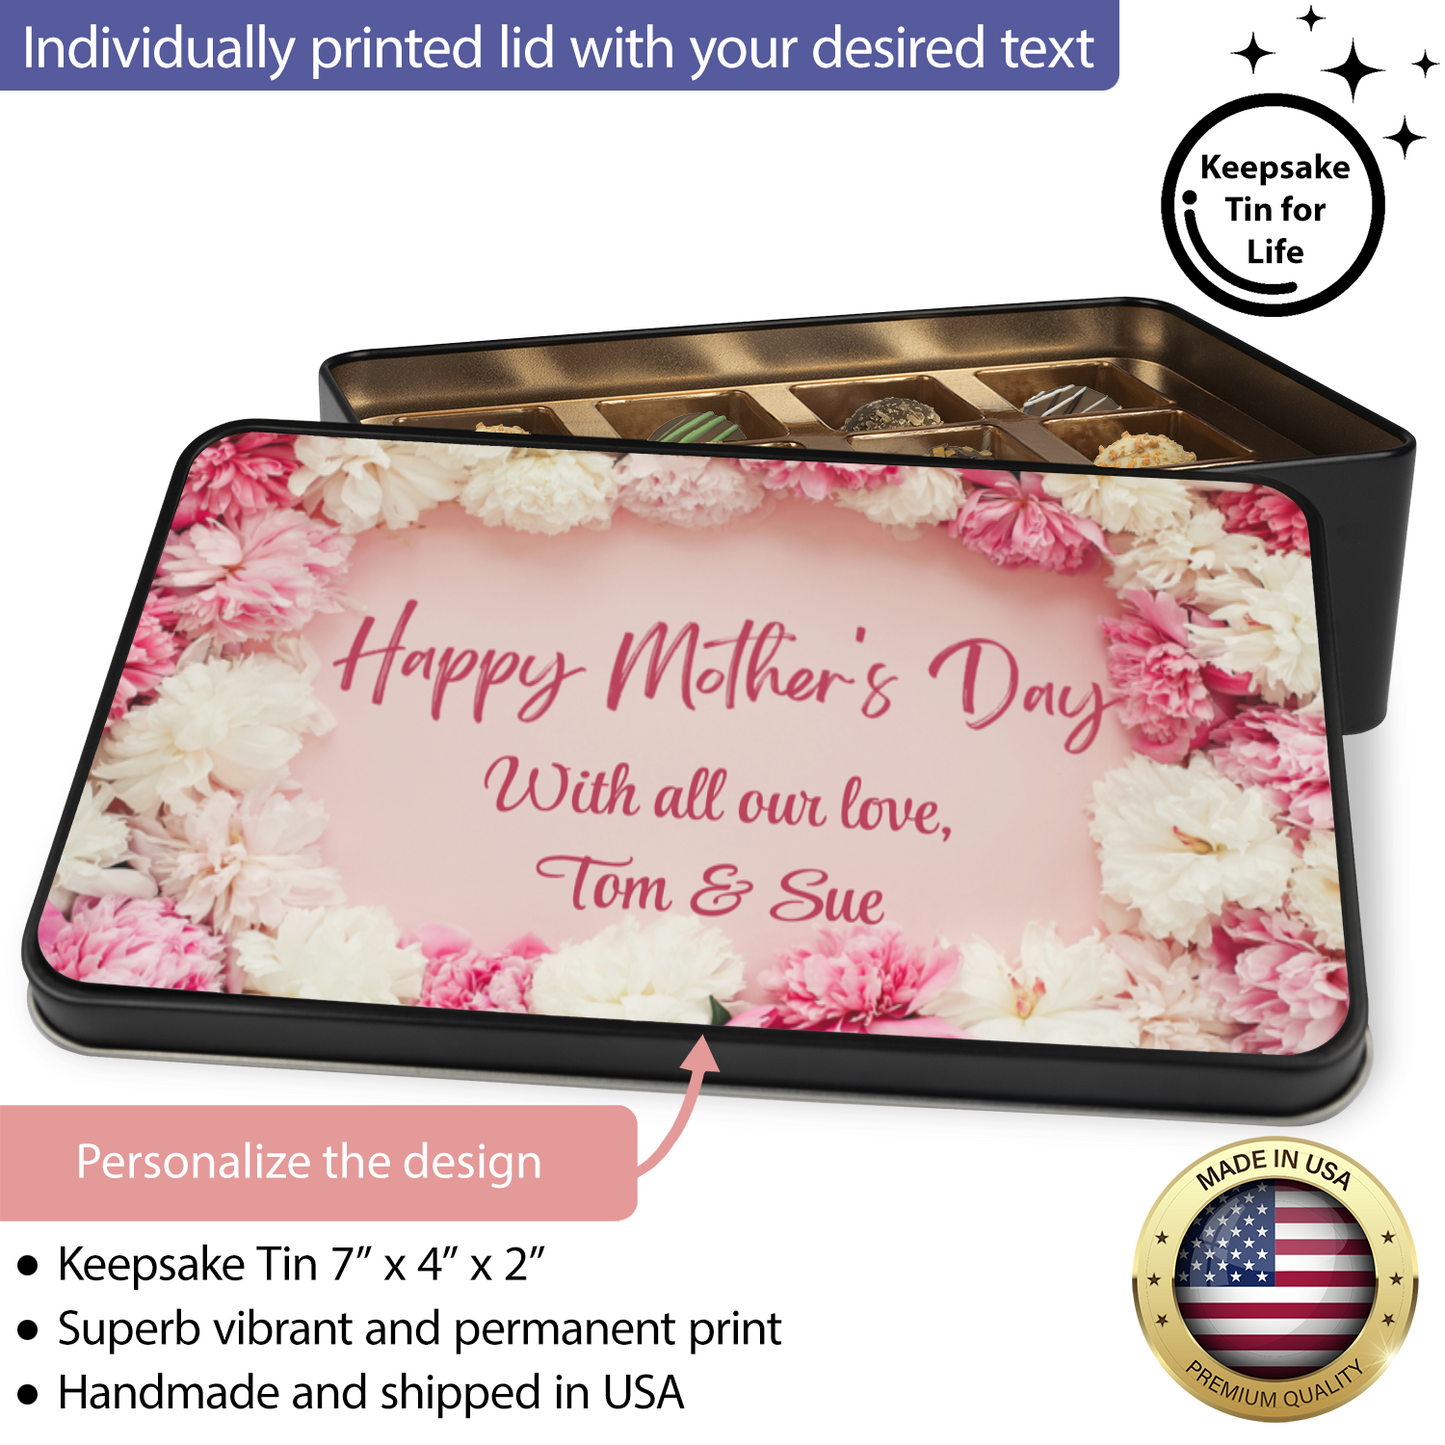 Personalized Mother's Day Chocolate Truffles and Keepsake Tin